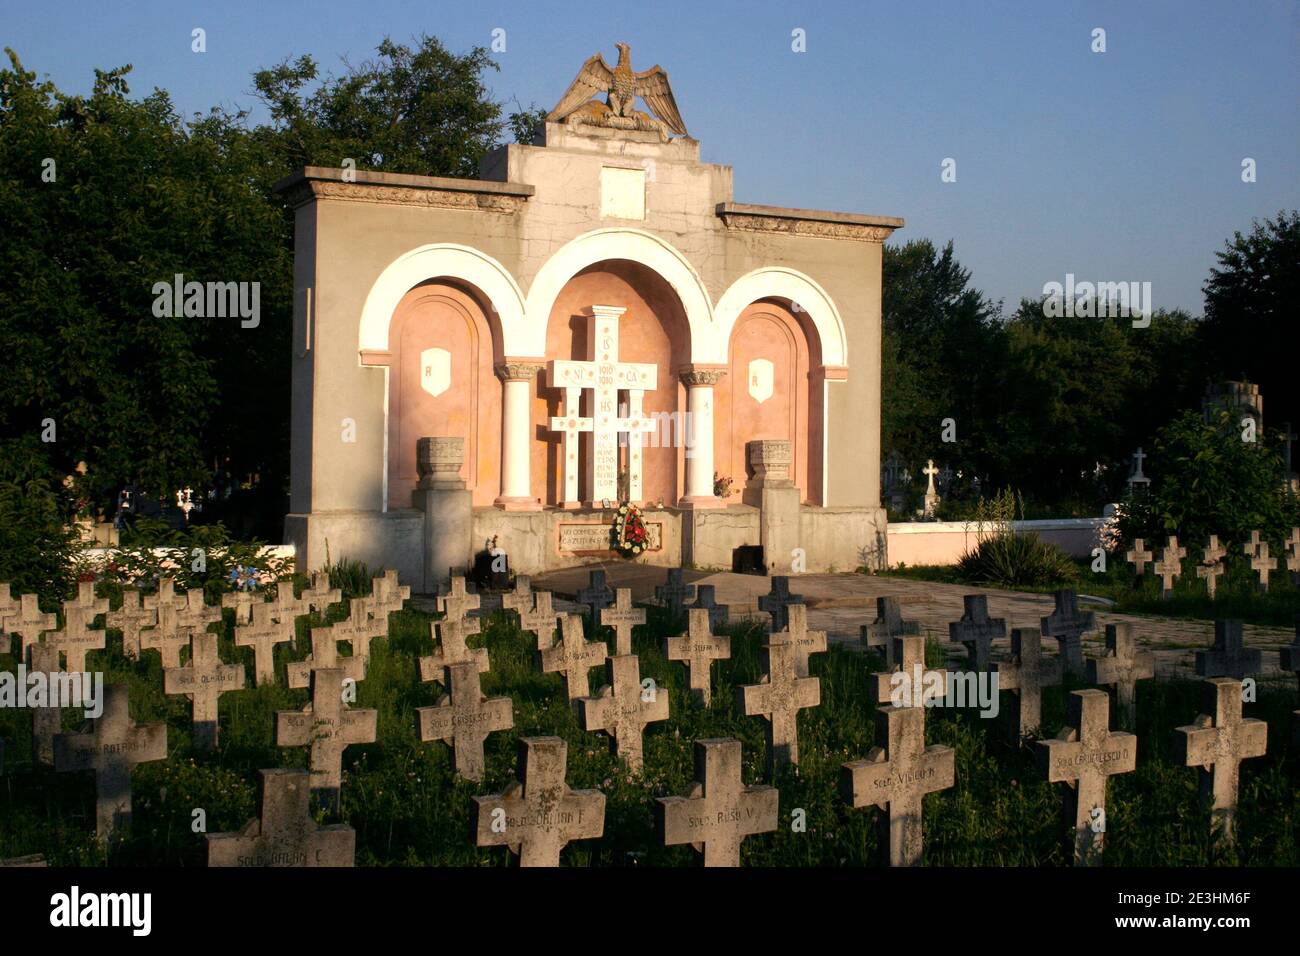 Botosani, Romania. Cemetery for soldiers fallen in World War I. Stock Photo